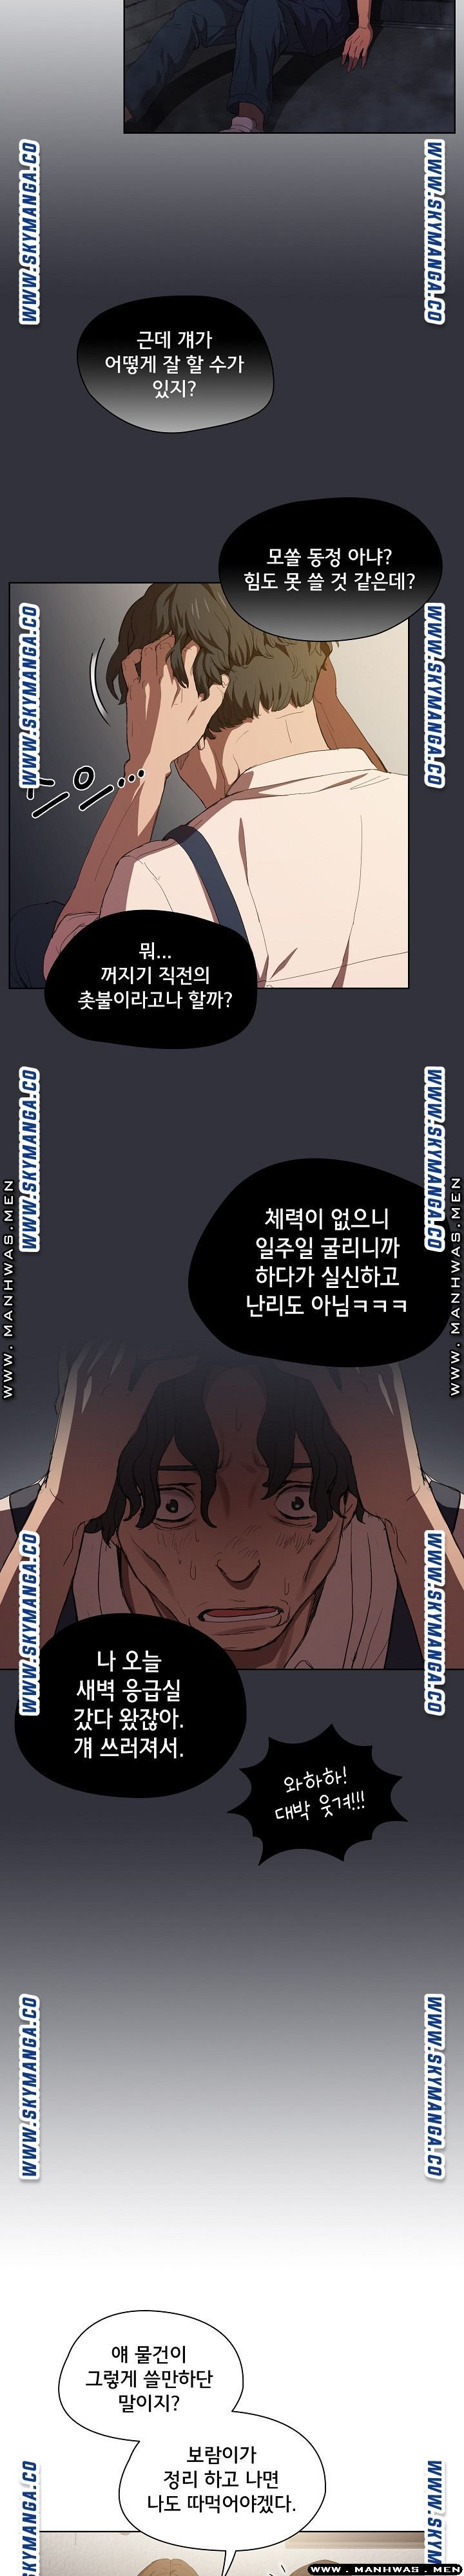 how-about-getting-lost-raw-chap-8-12